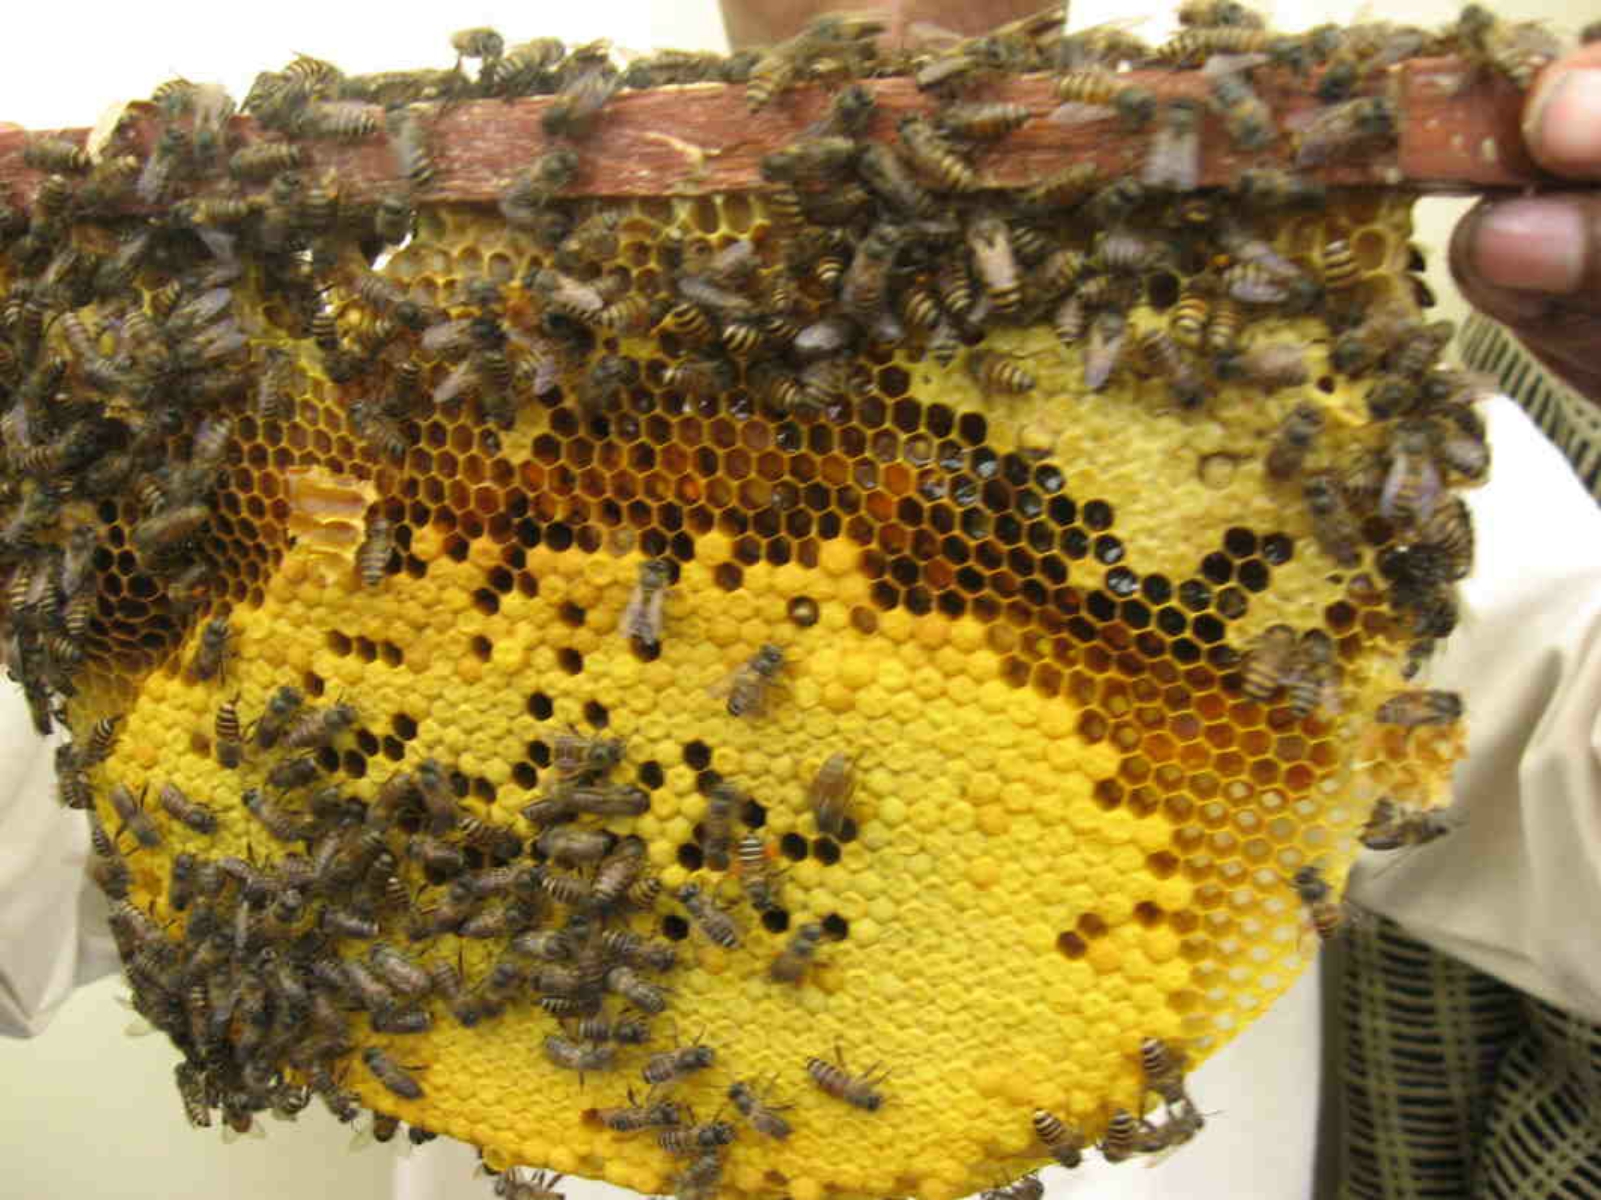 BEES HAVE ALSO BEEN RECENTLY SHOWN TO OFFER A POTENTIAL CURE TO CANCER.